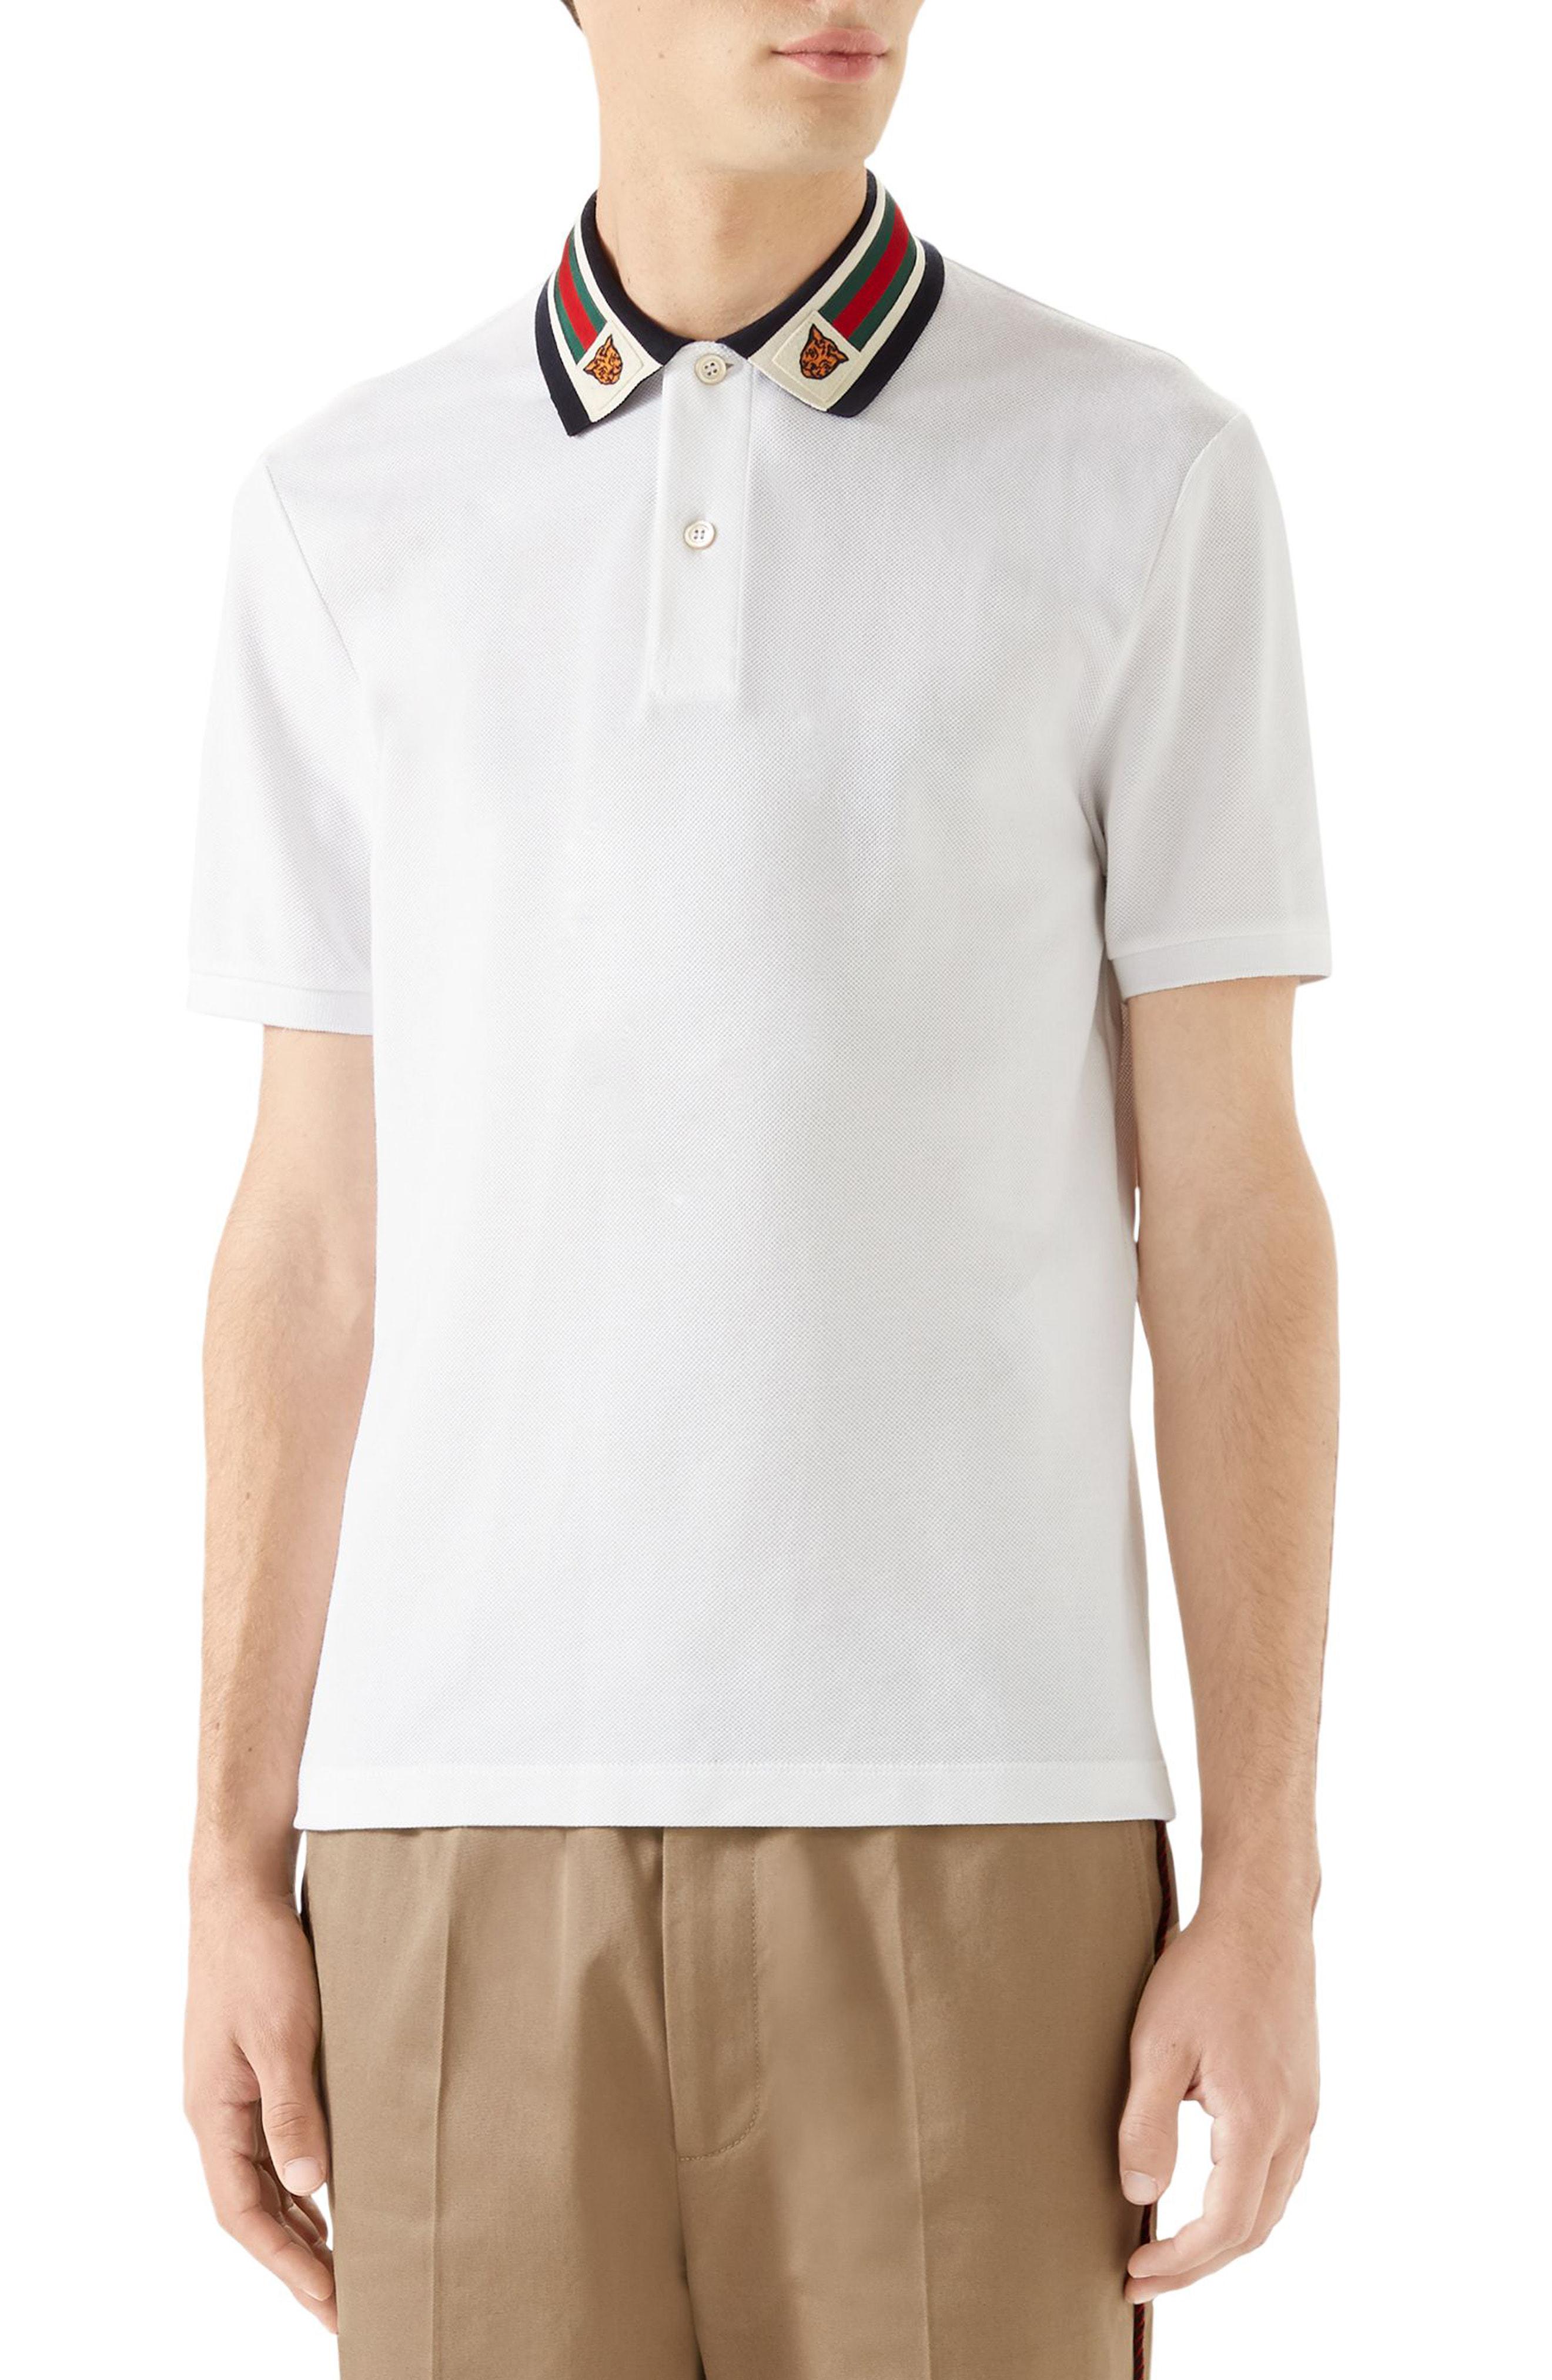 Lyst - Gucci Tiger-patch Cotton-blend Piqué Polo Shirt in White for Men